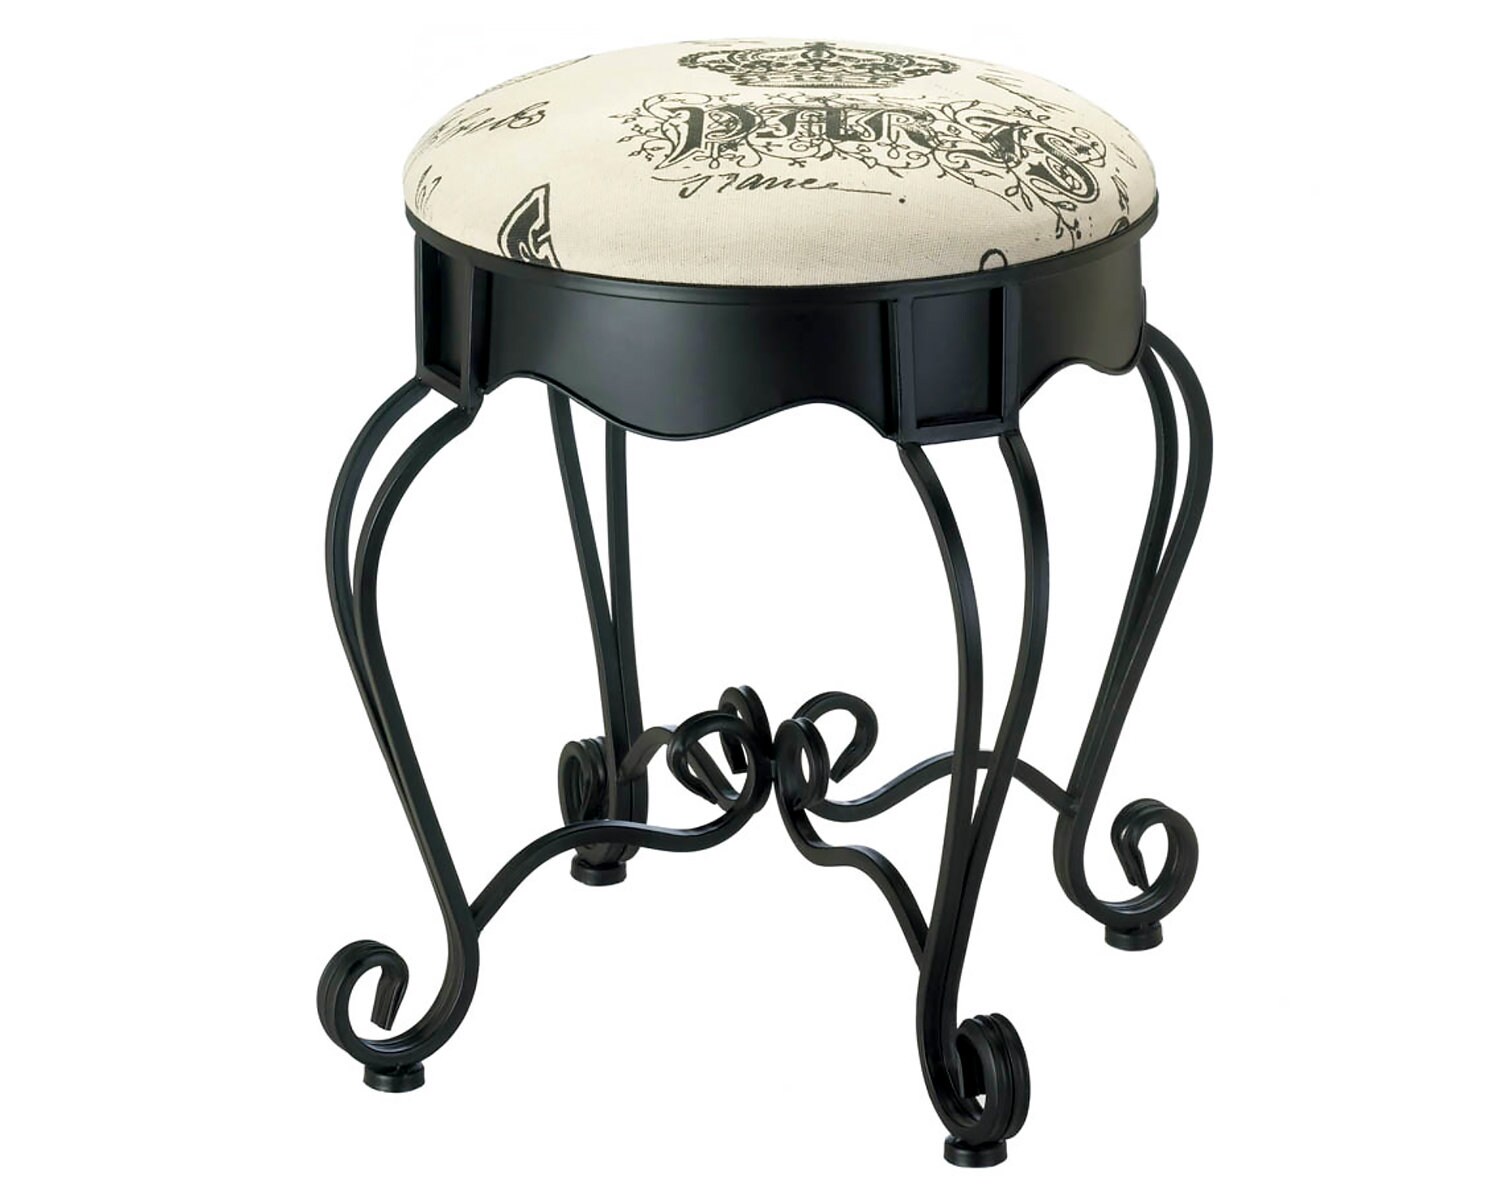 Round Metal Stool Chair Footstool for Paris Lovers Francophile Gifts for Her Vintage French Accent Stools Paris Bathroom Makeup Stool Black Chic European Stool Parisian Iron Vanity Stool 